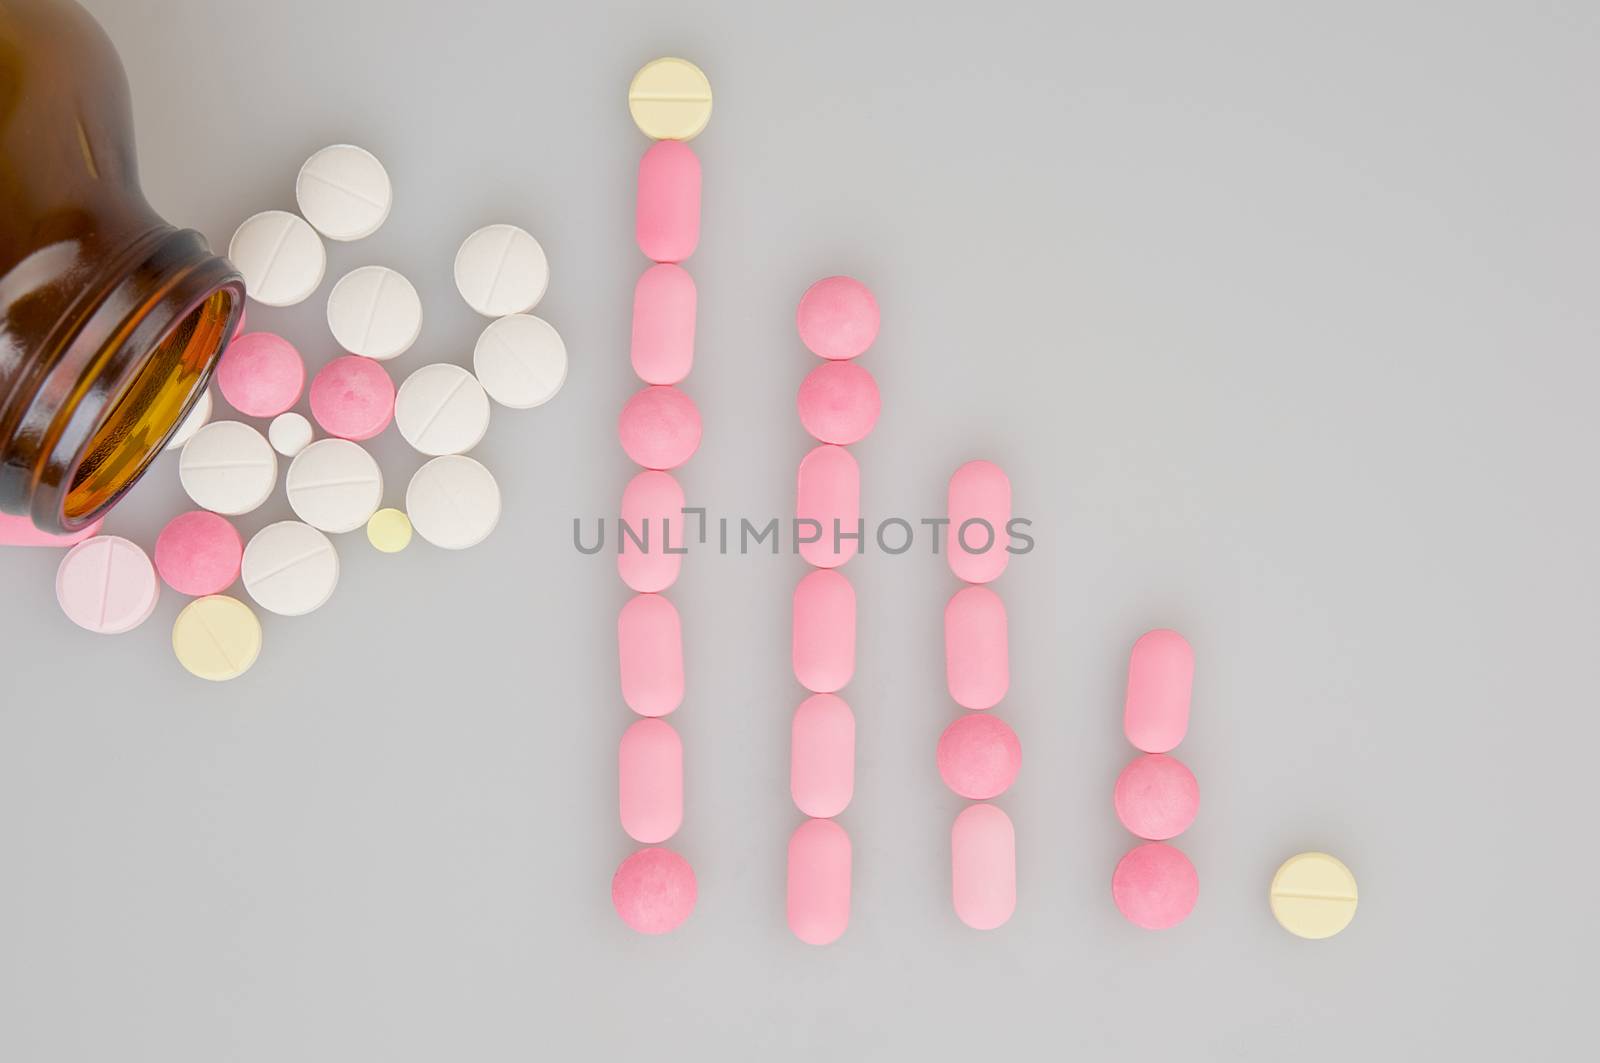 Colorful tablets place as bar graph and brown bottle on white background.